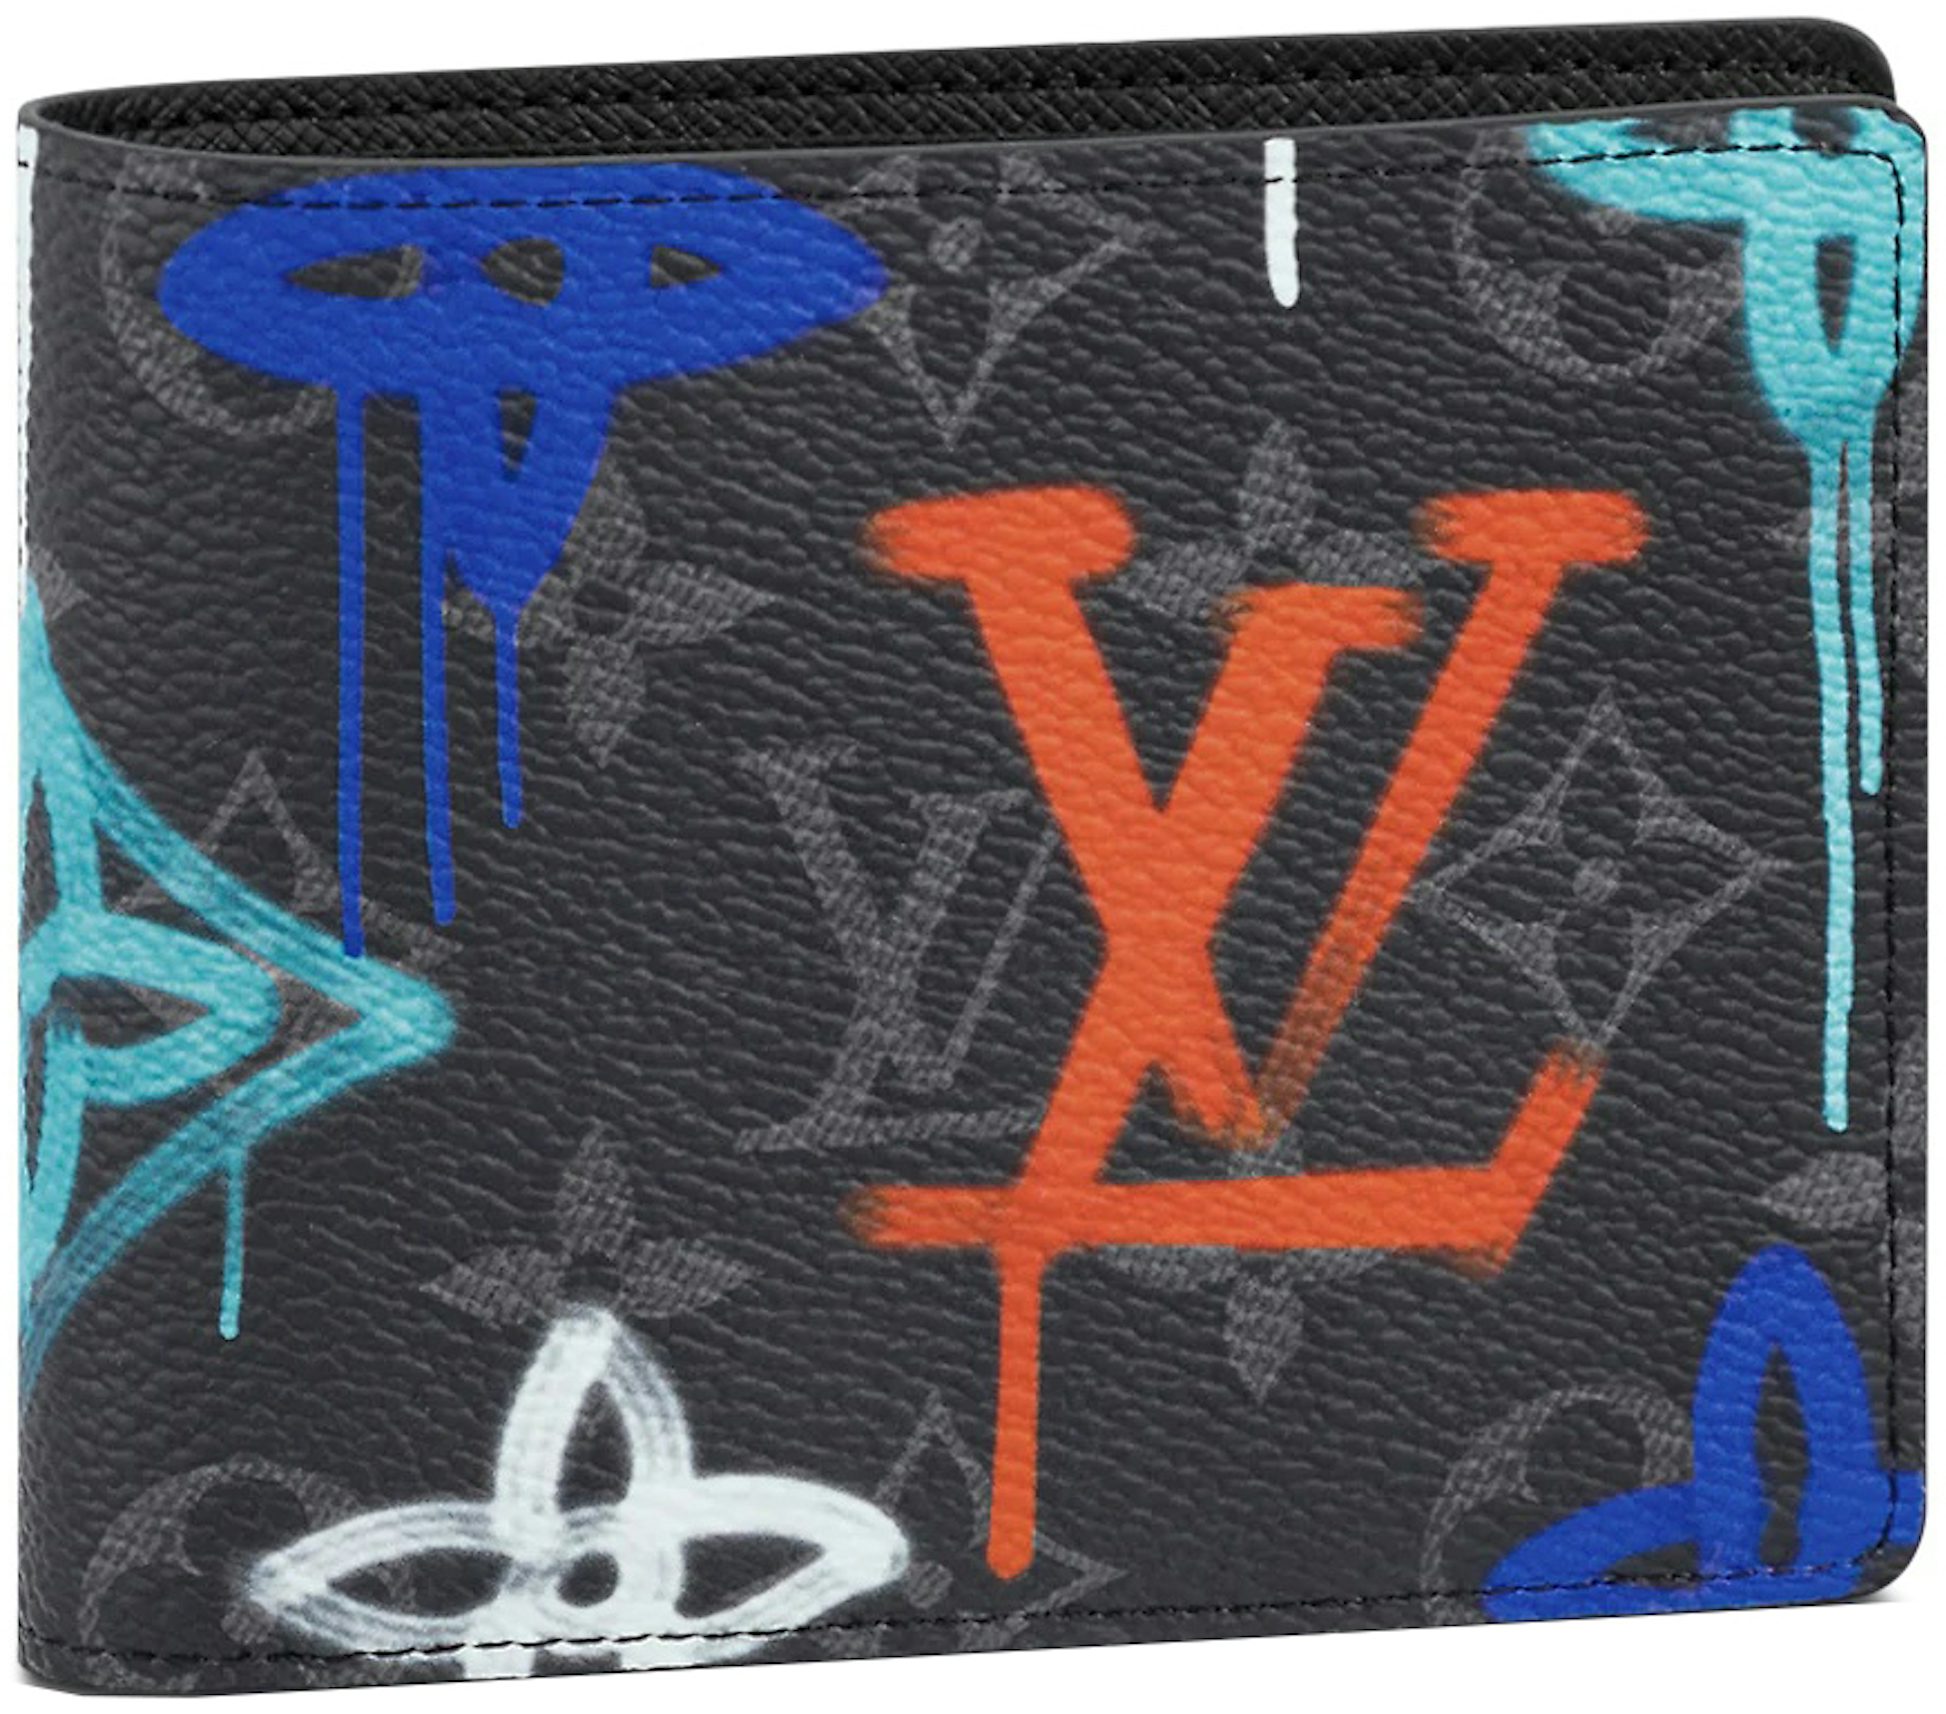 Louis Vuitton Multiple Wallet LV Graffiti Multicolor in Coated Canvas/ Cowhide Leather - US